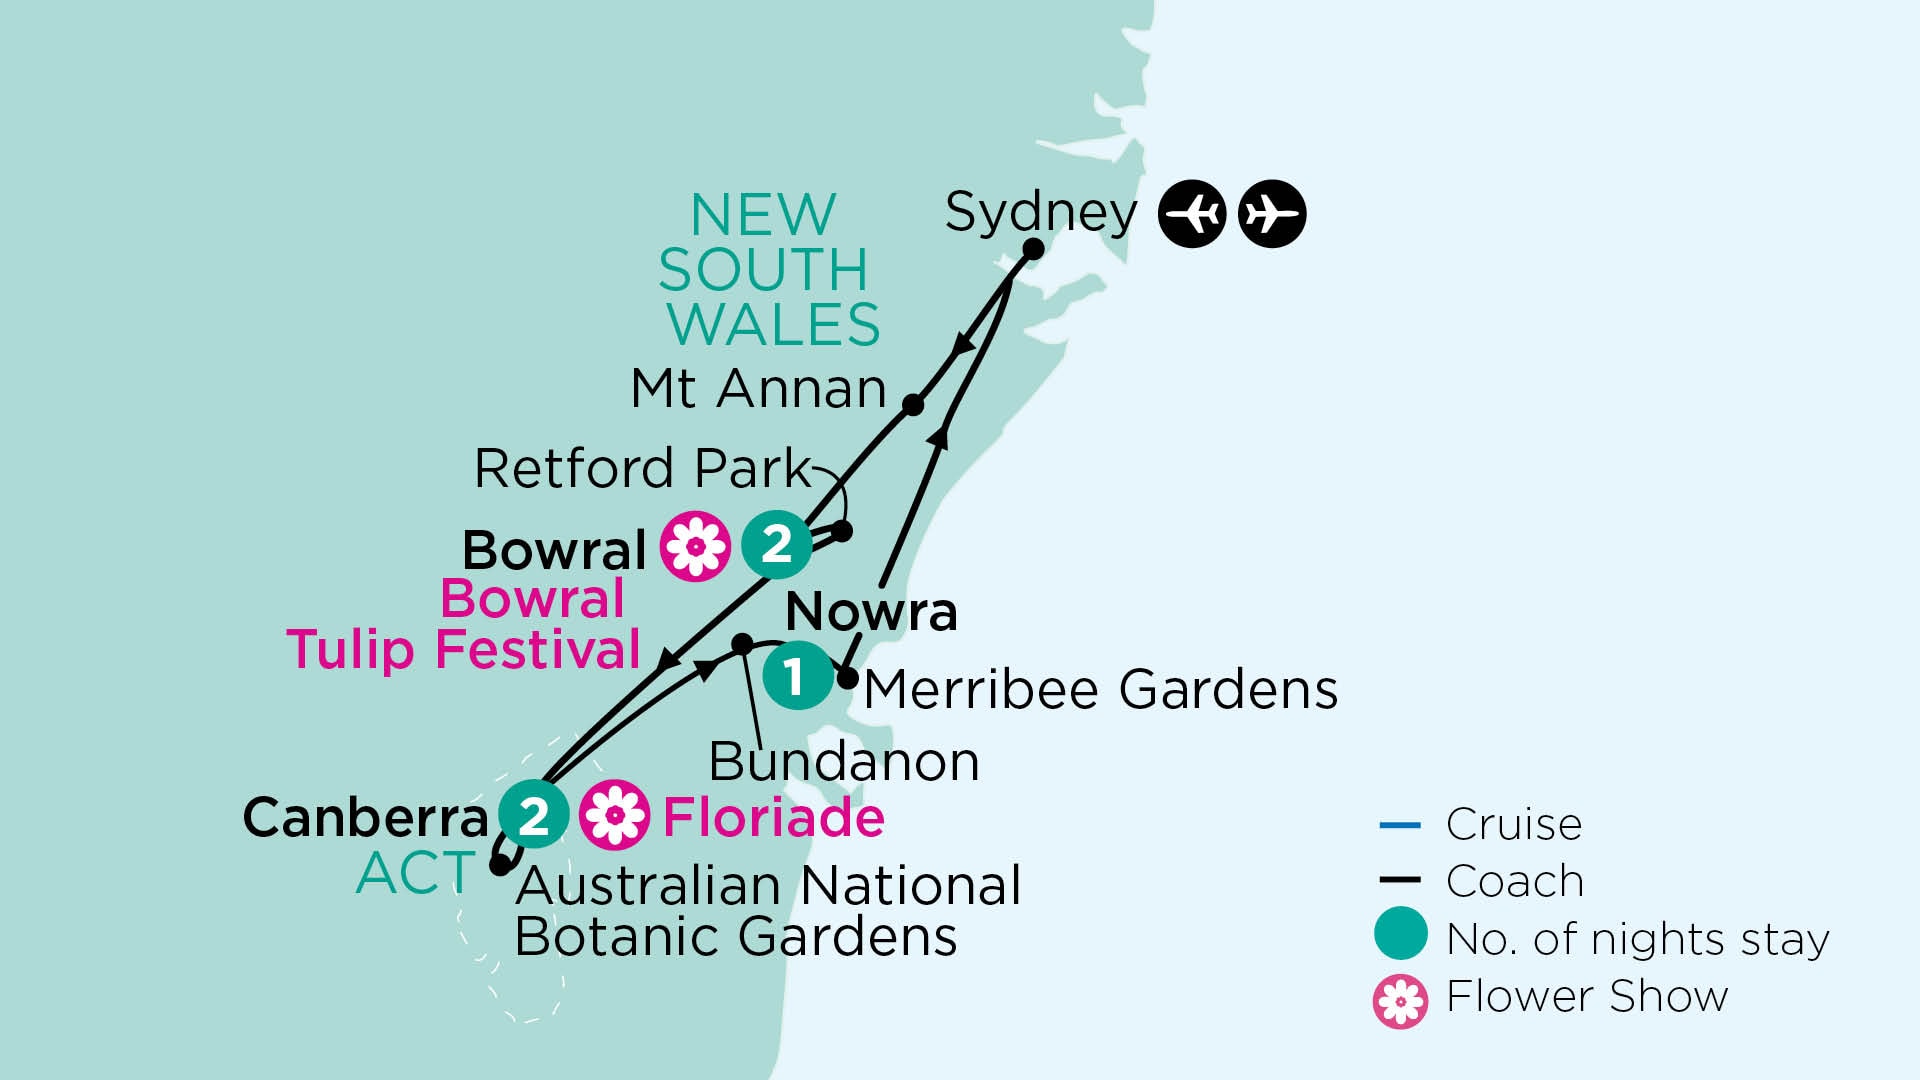 tourhub | APT | Canberra’s Floriade, New South Wales Tulips & Private Gardens in Spring | Tour Map